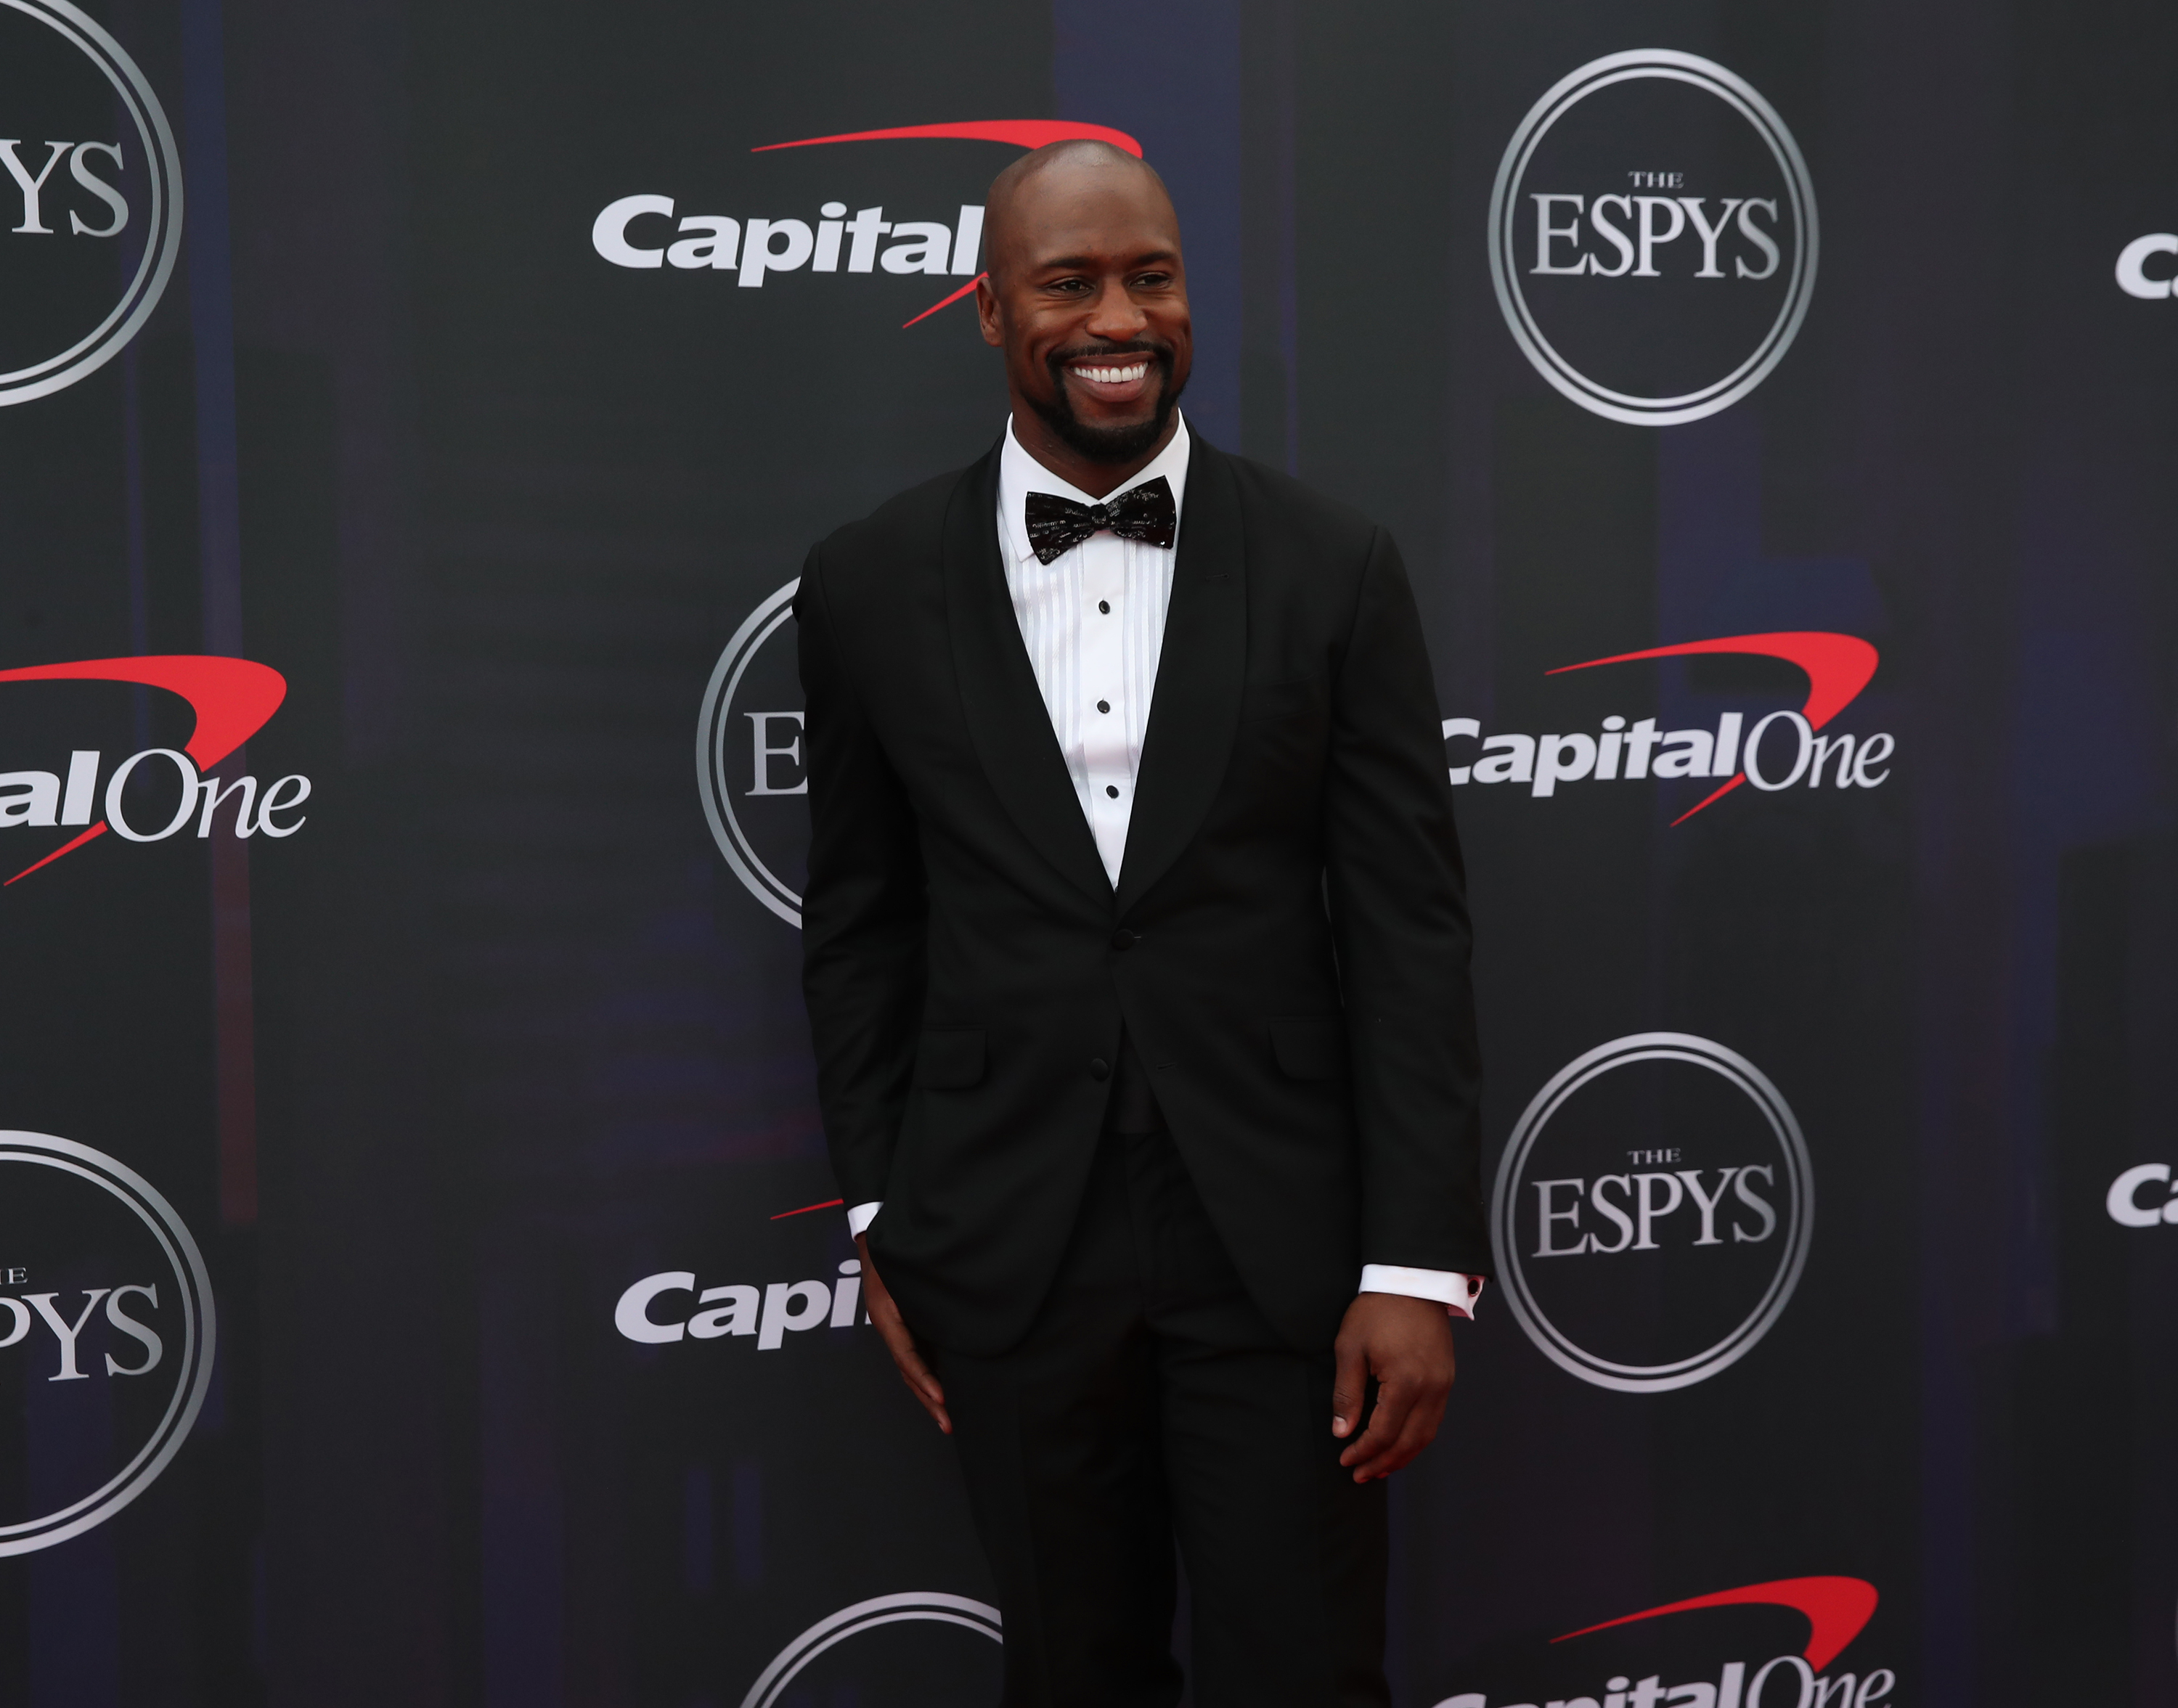 Vernon Davis dressed in a tuxedo on the red carpet at the 2021 ESPYS